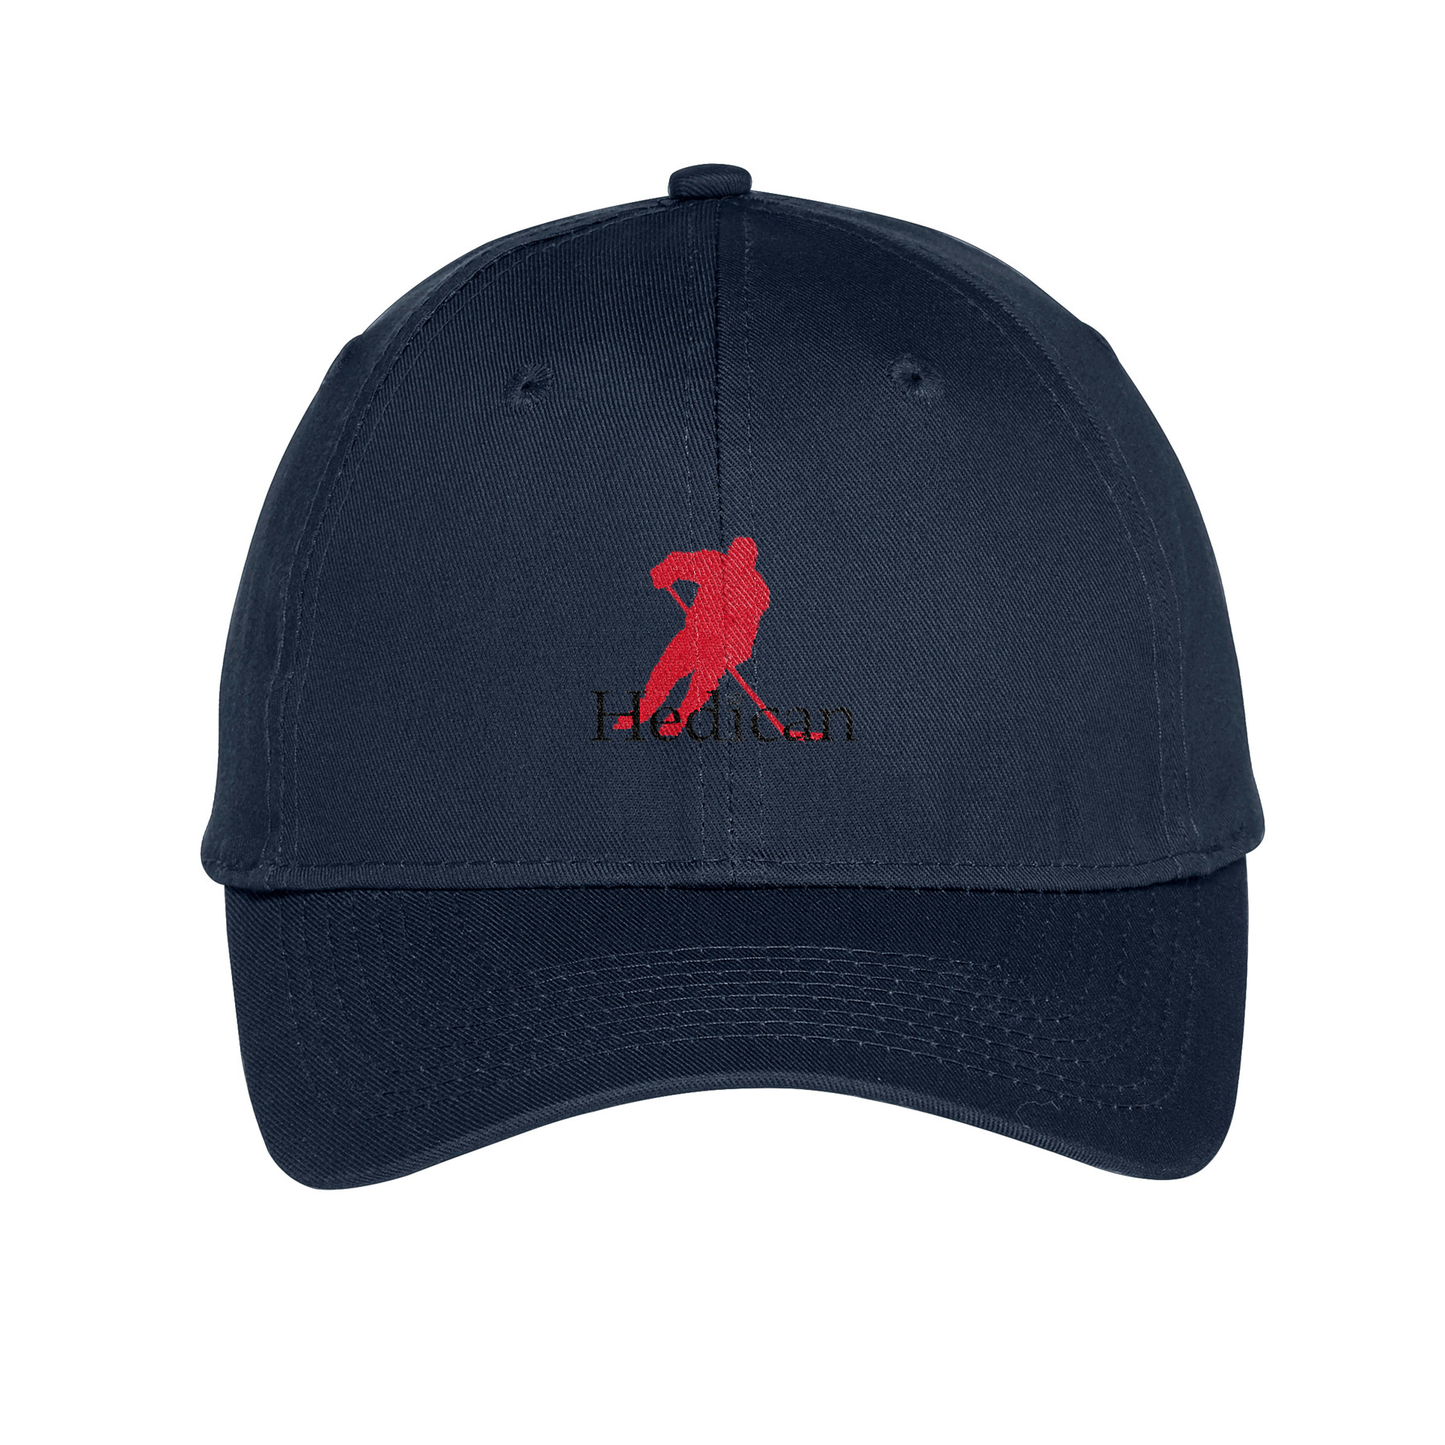 GT Hedican Embroidered Twill Cap